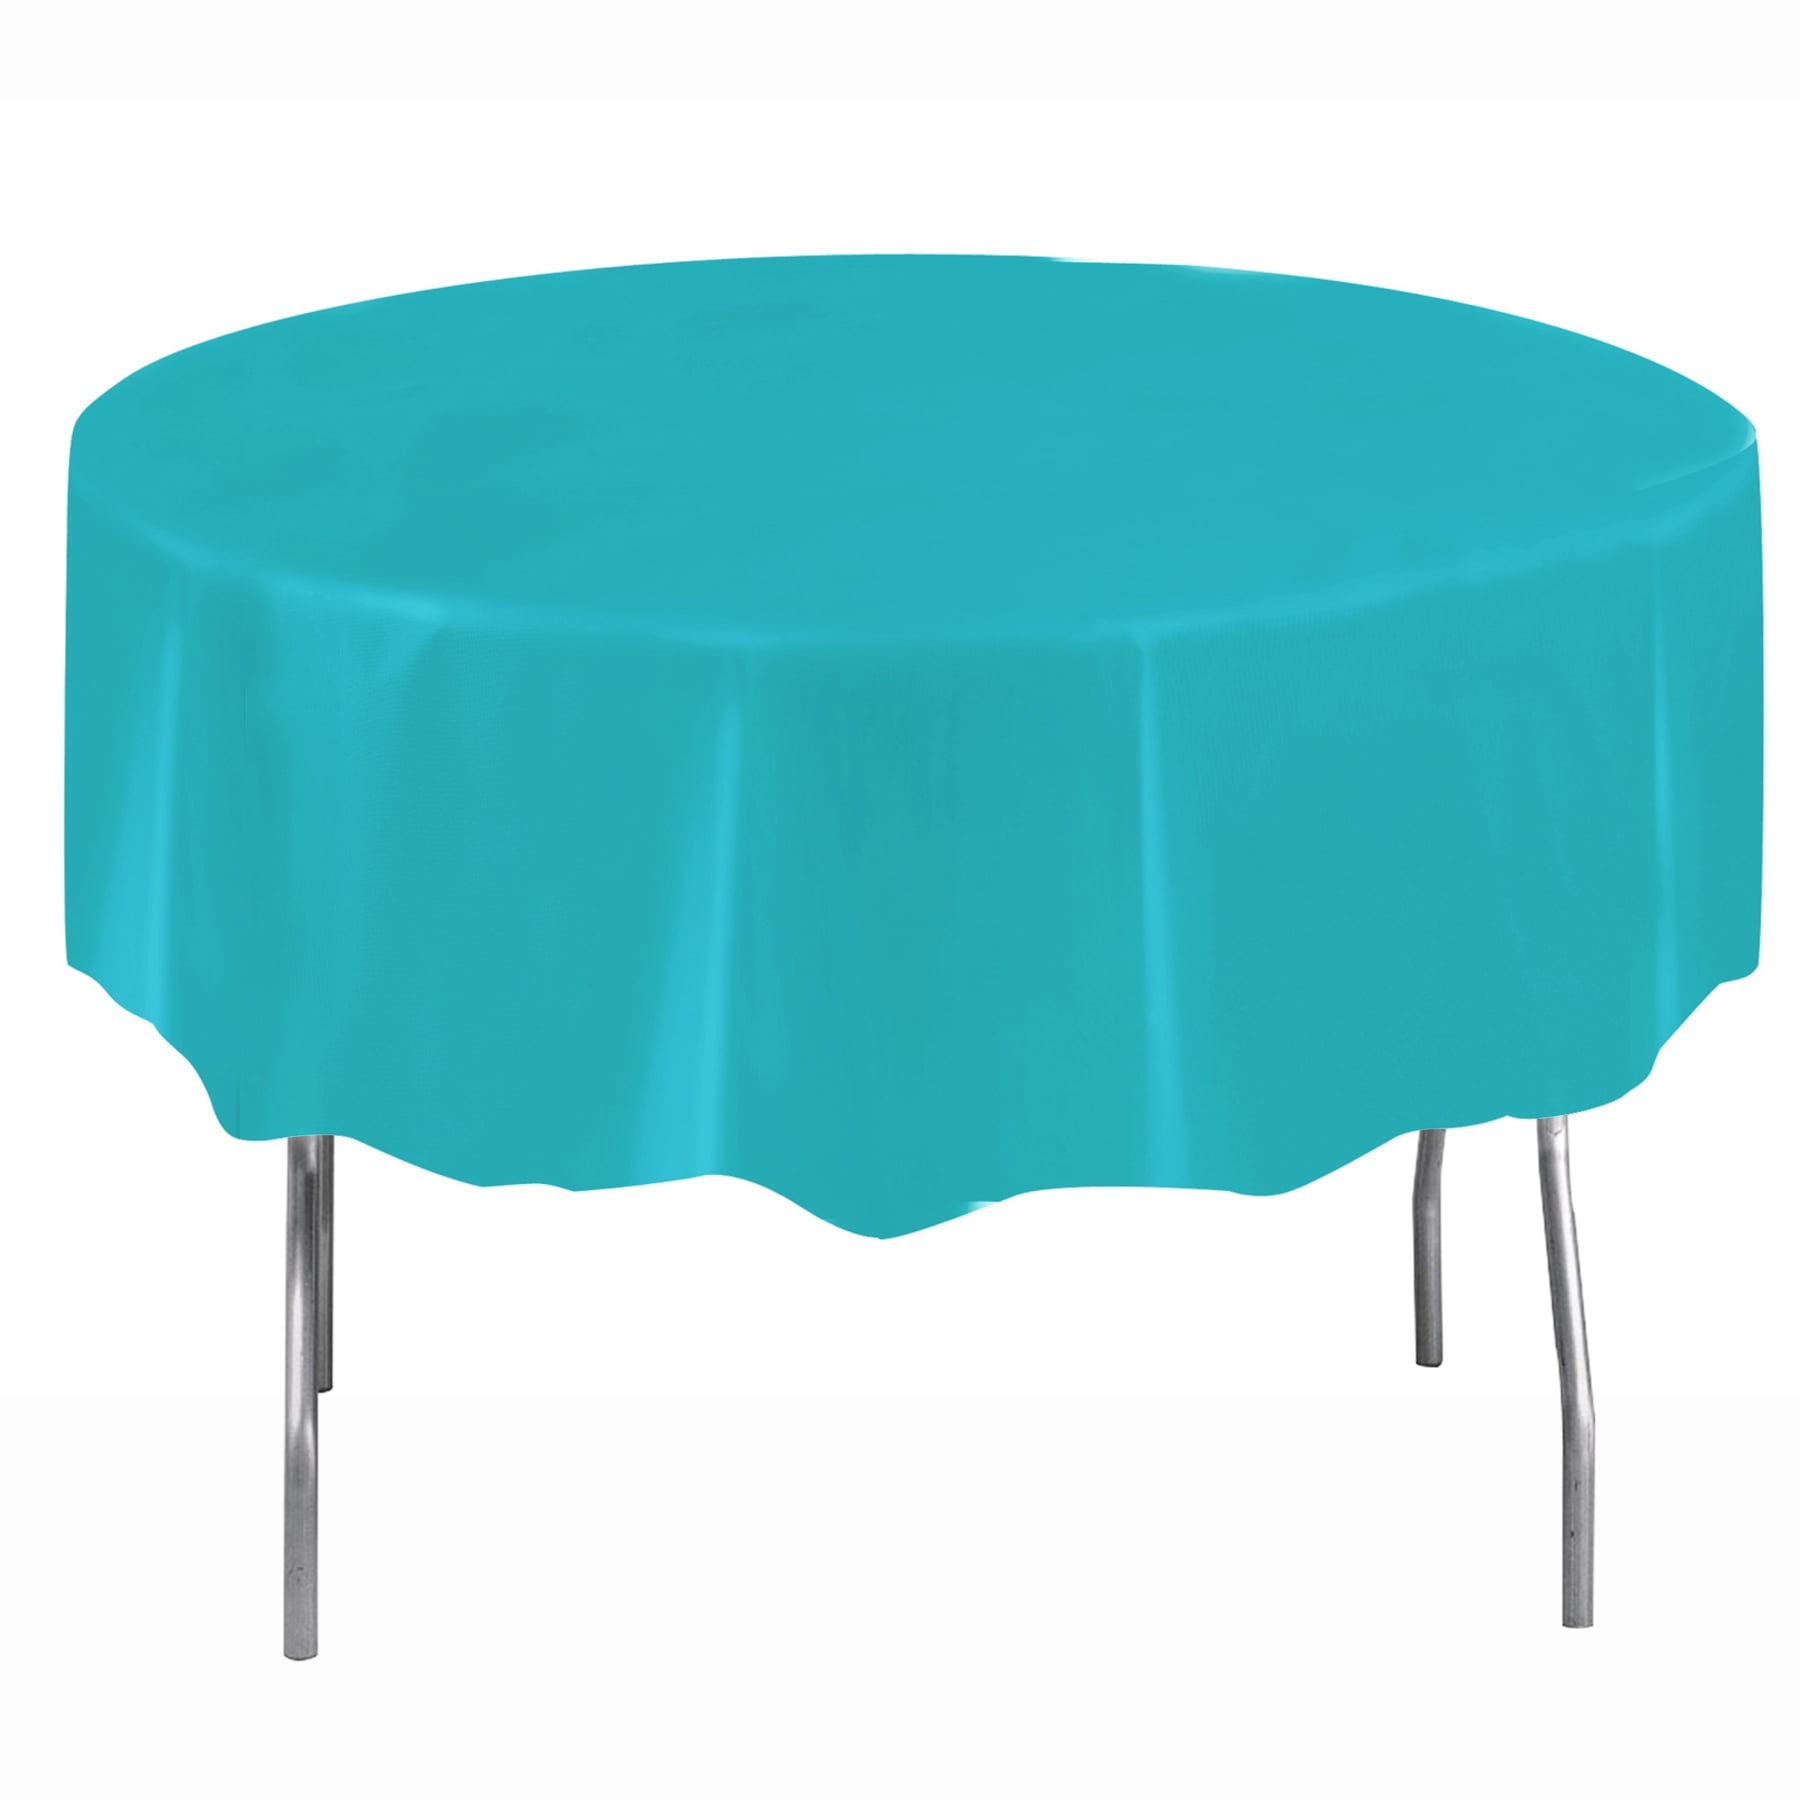 Way to Celebrate! Teal Plastic Round Tablecloths, 84in, 2ct